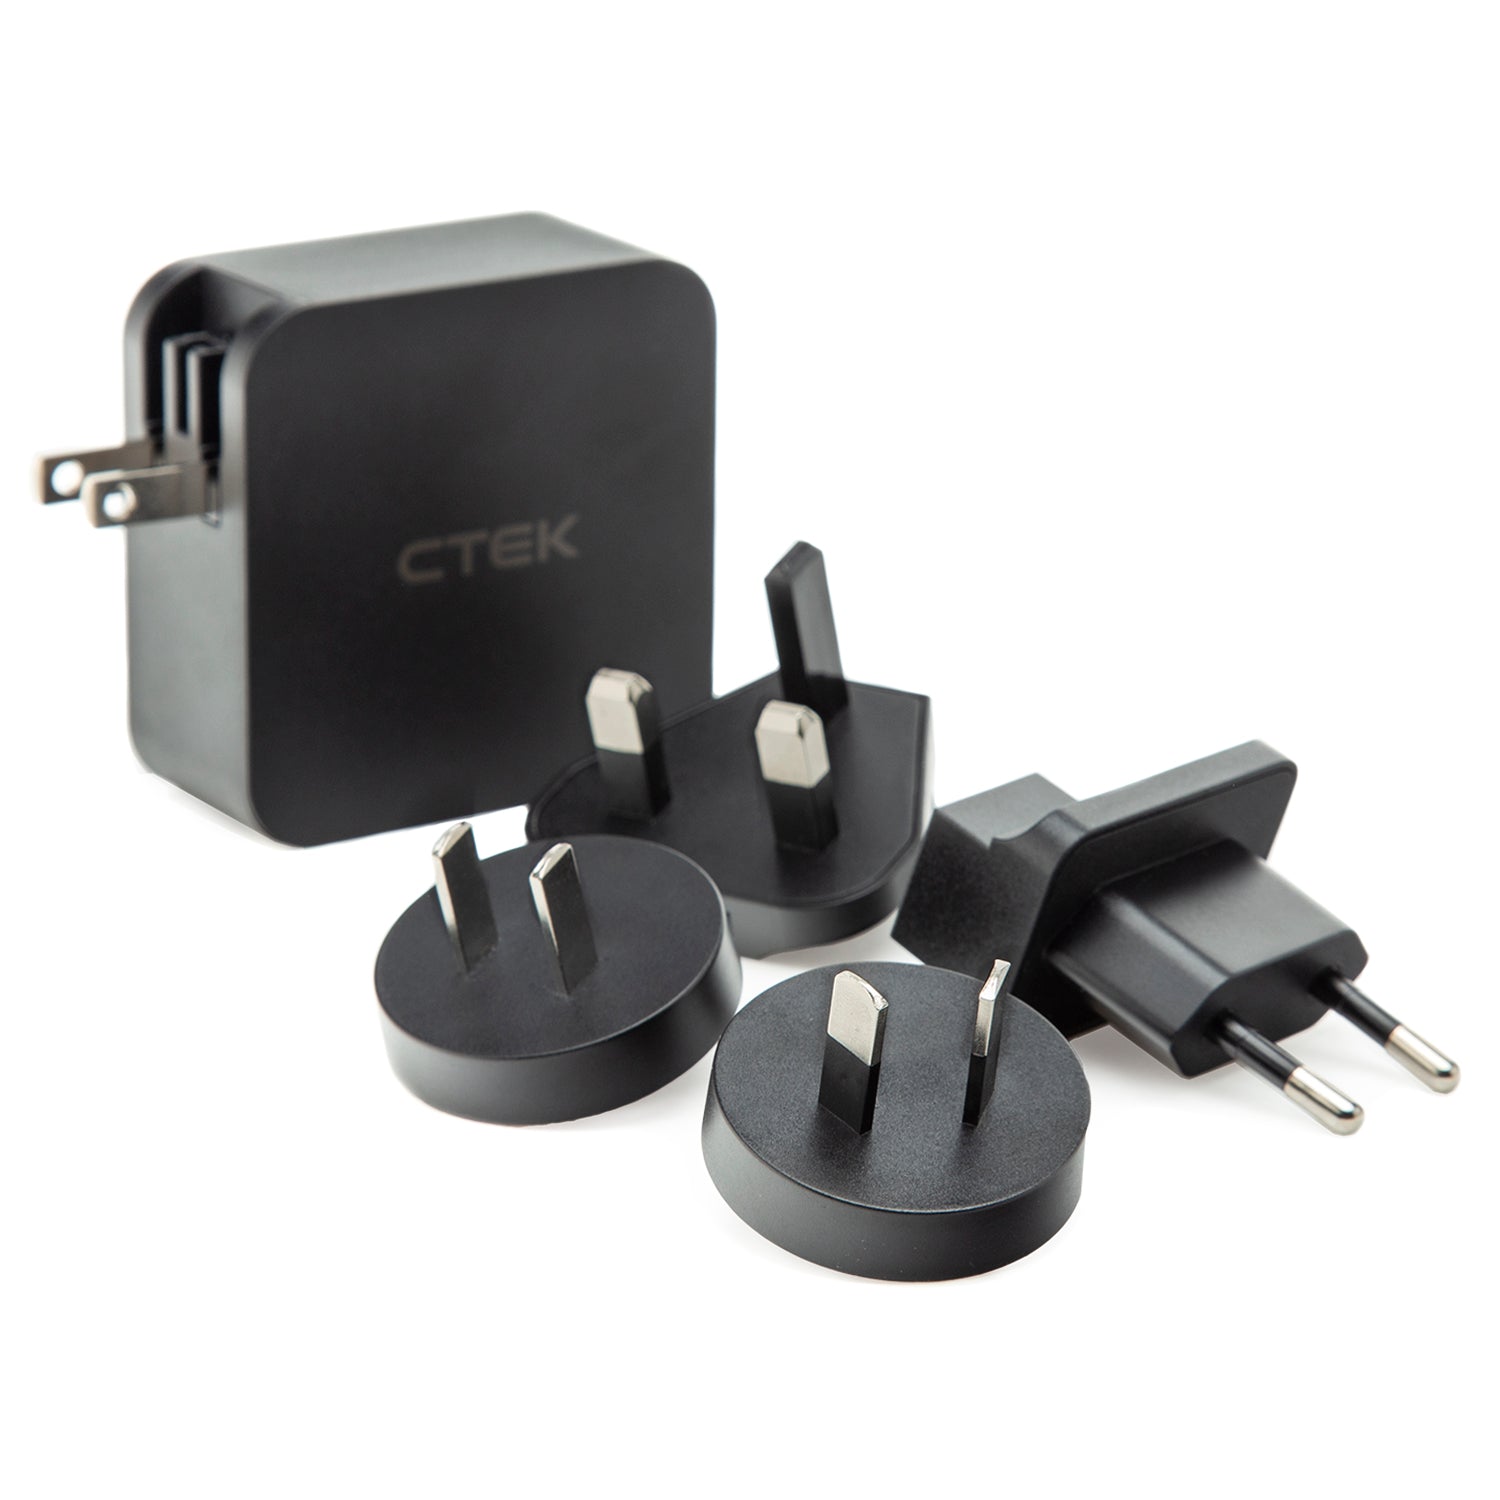 Ctek CS Free - 12v Portable Charger And Wall Mount Pack – Smarter